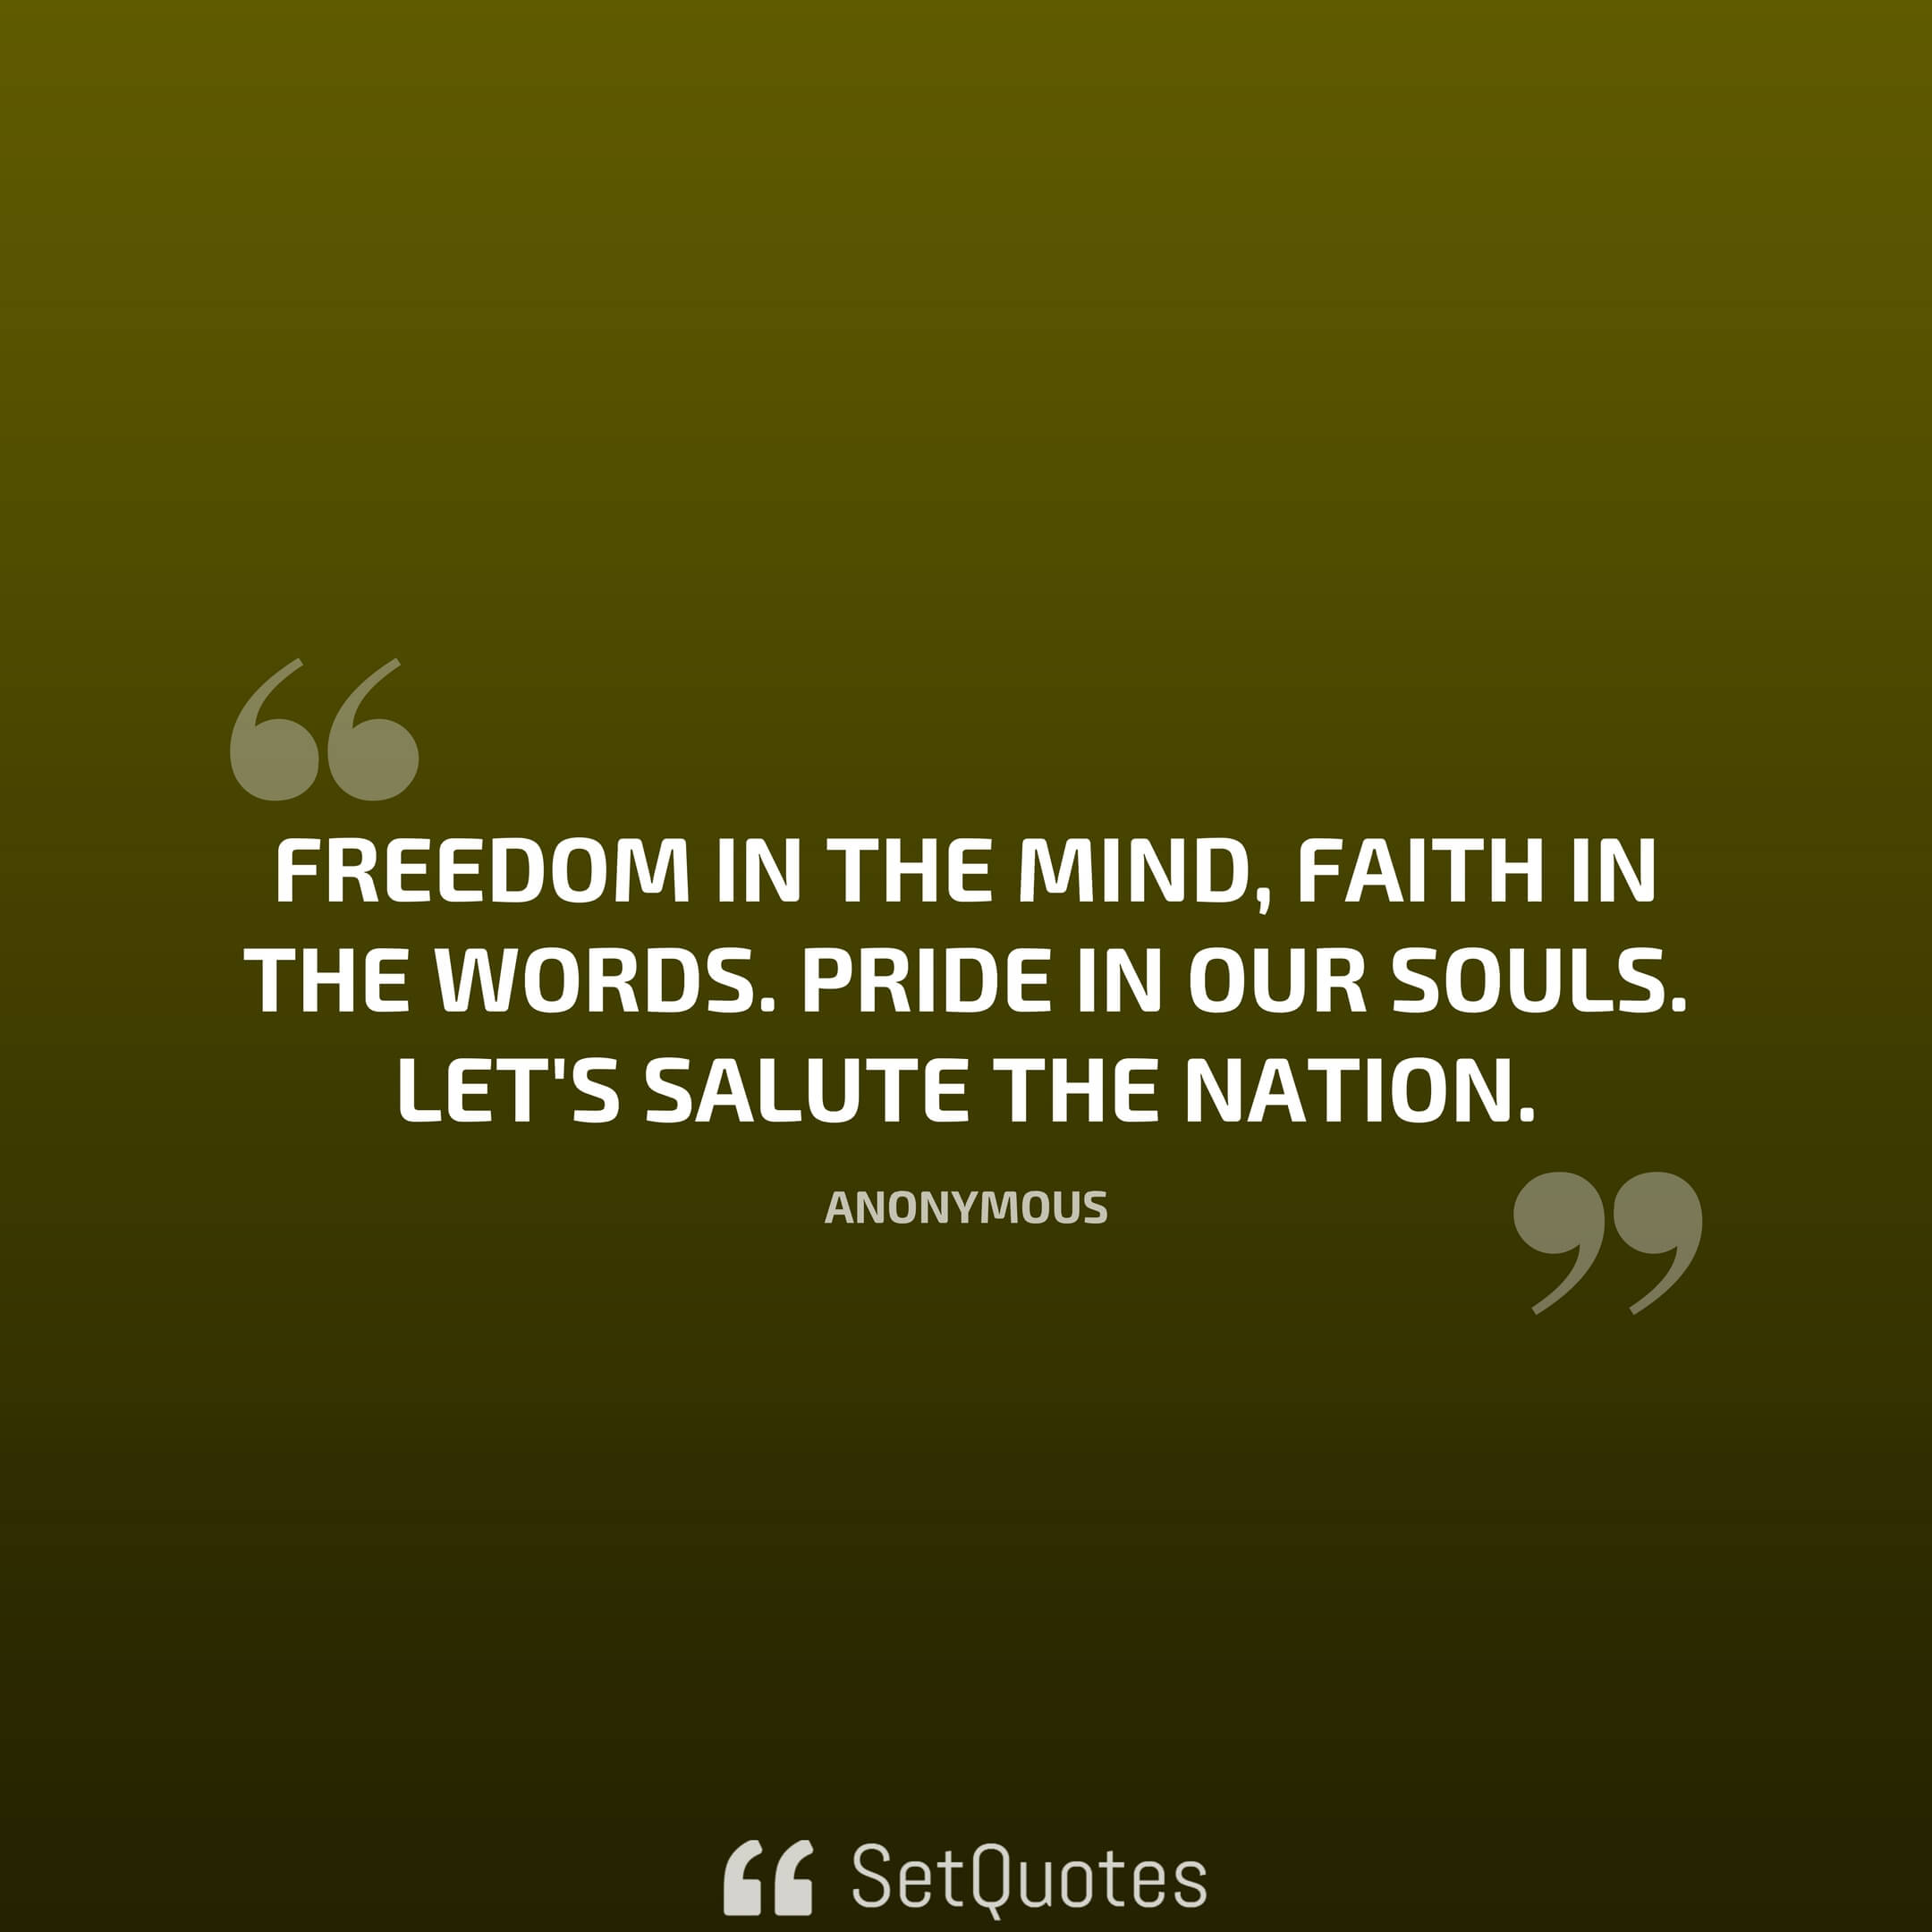 Freedom in the Mind, Faith in the words. Pride in our Souls. Let's salute the Nation.